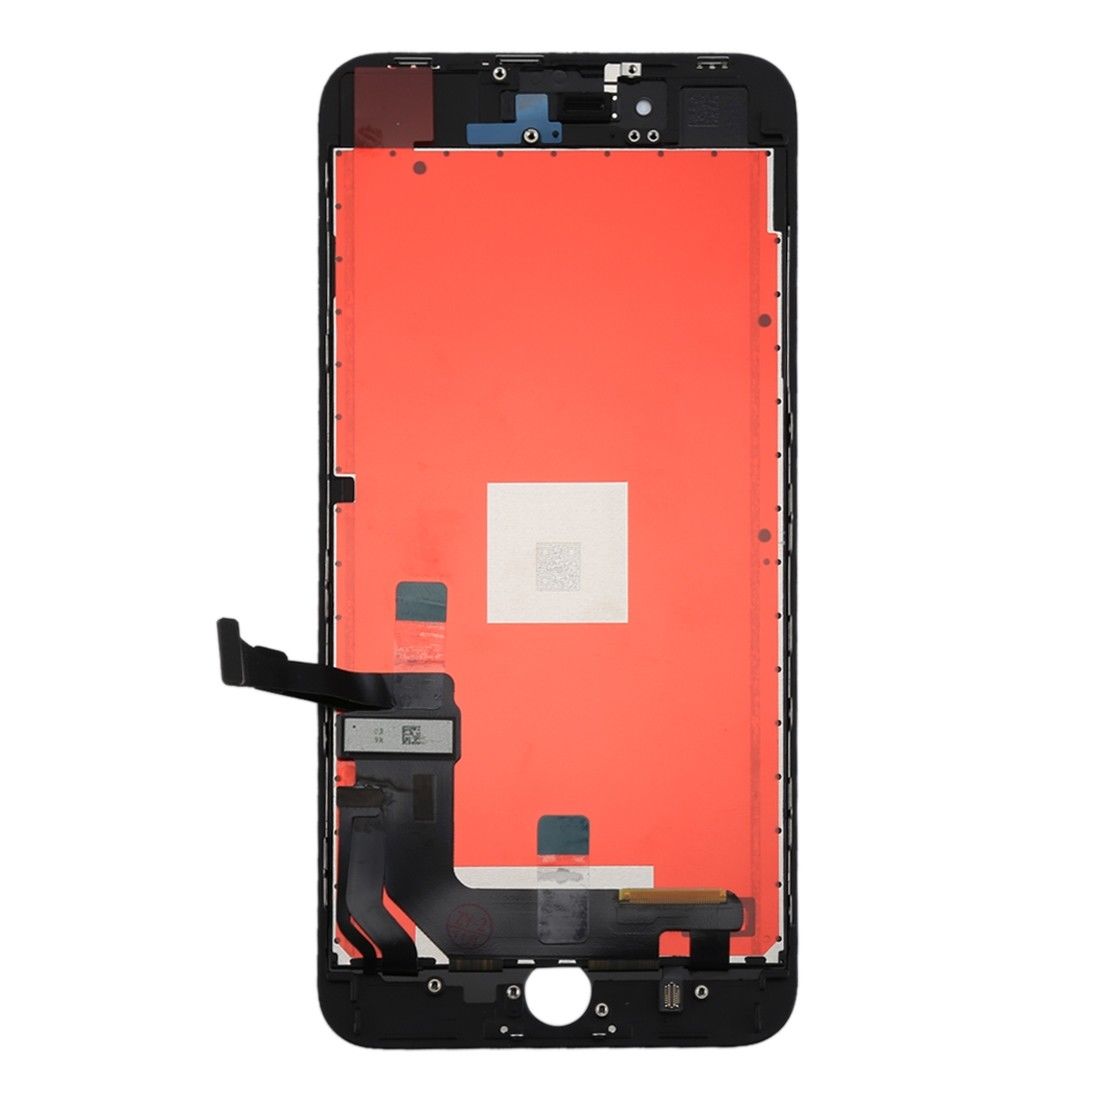 Apple iPhone SE 2nd 2020 Replacement LCD Touch Screen Assembly - Black for [product_price] - First Help Tech